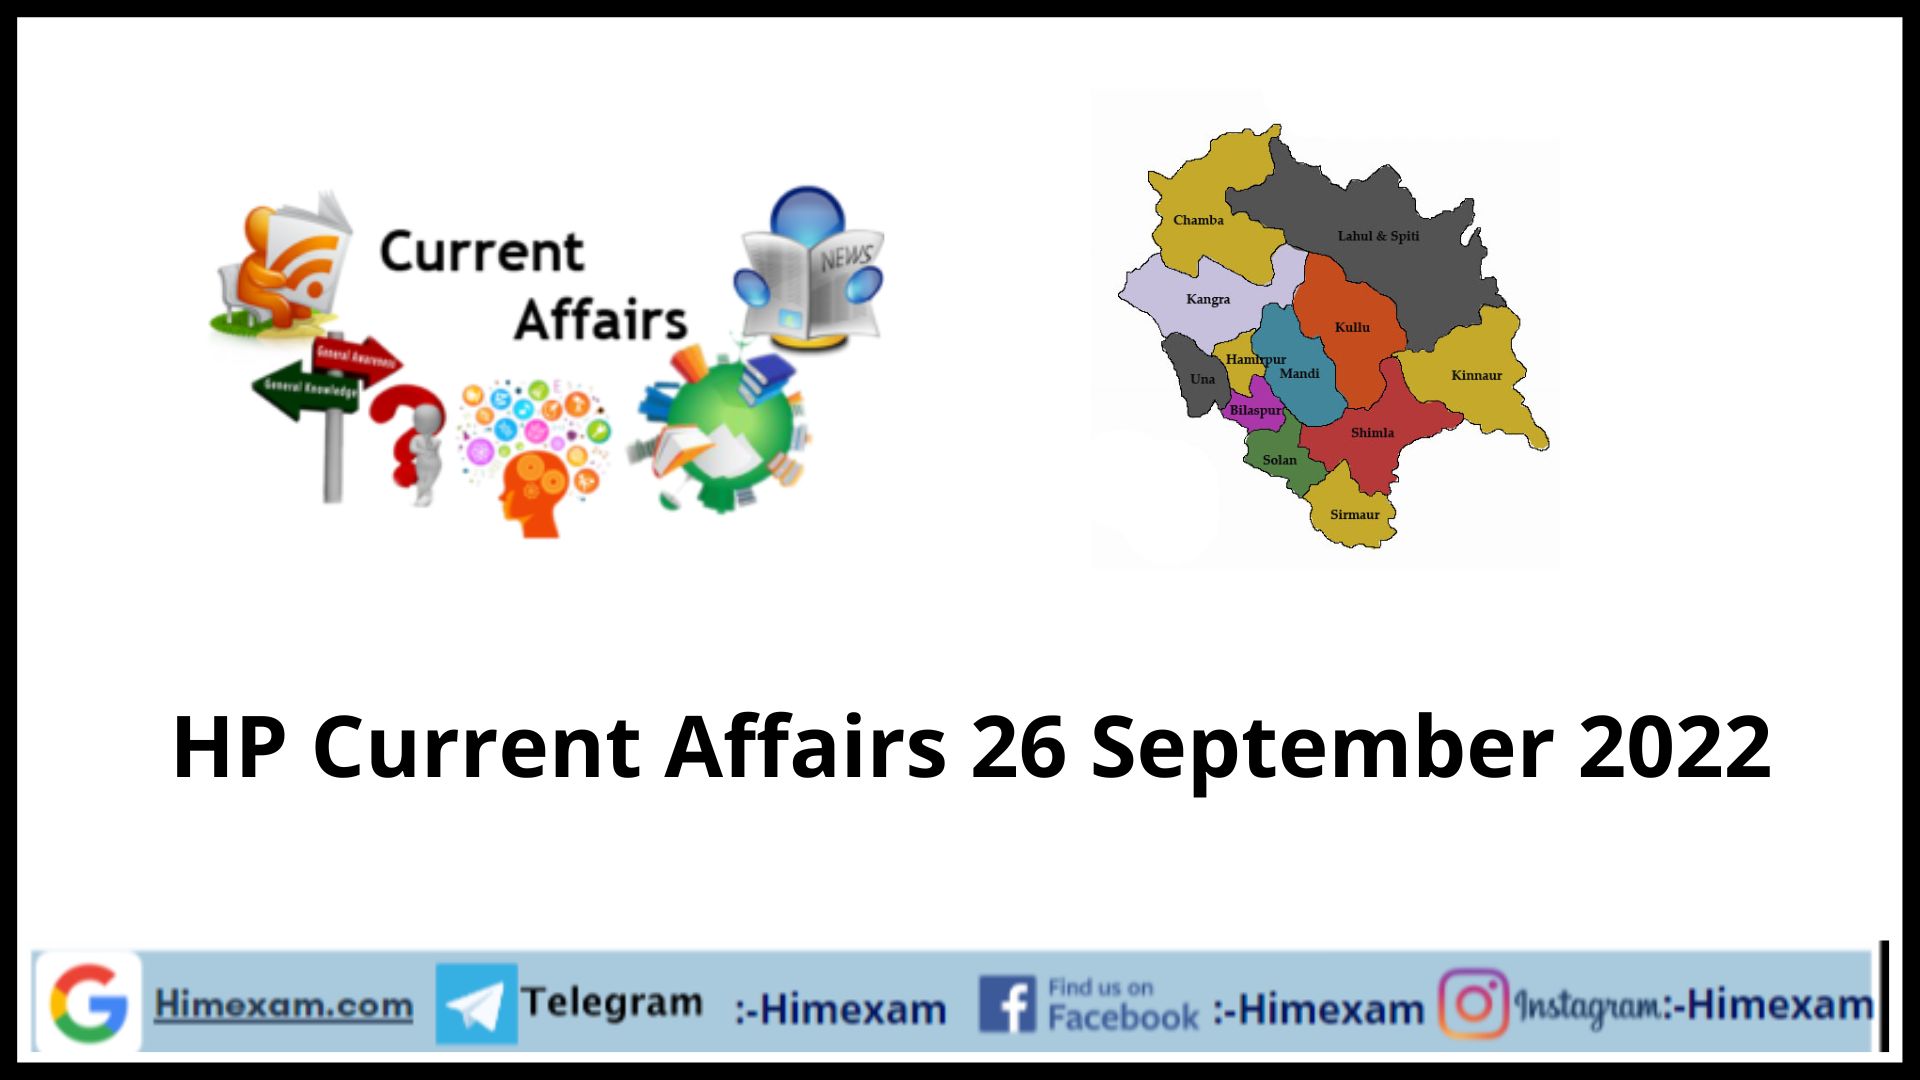 HP Current Affairs 26 September 2022